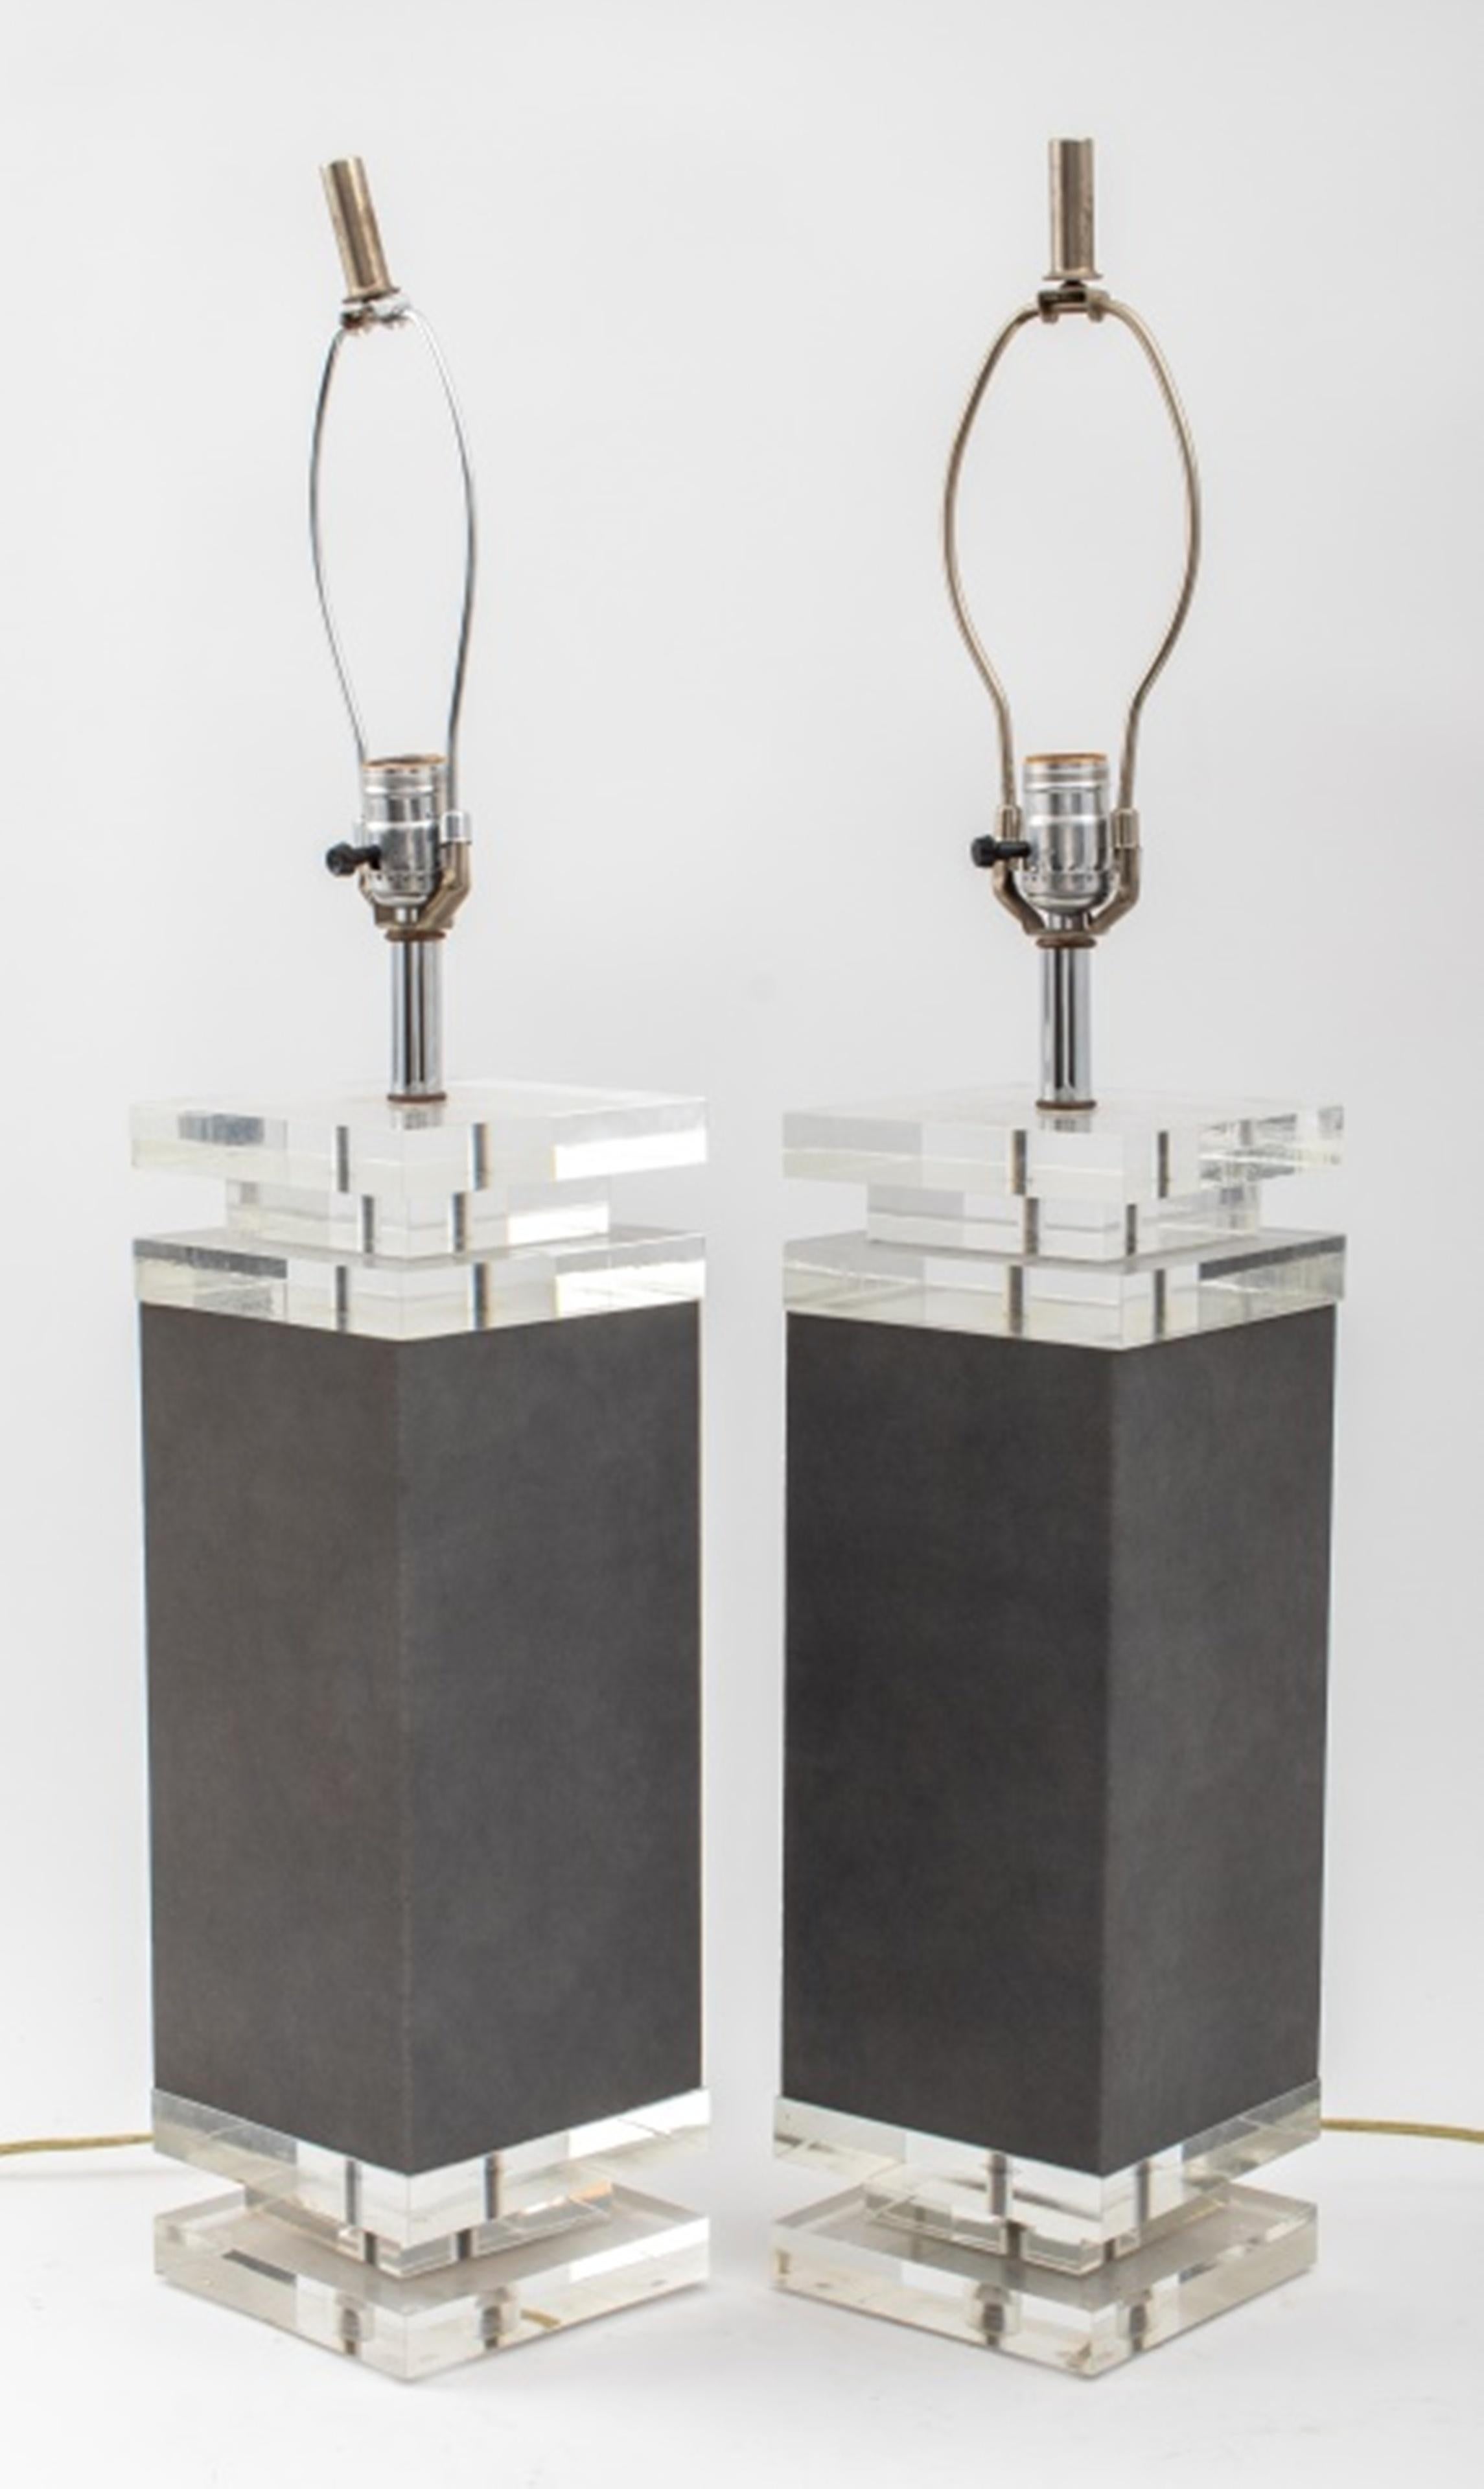 Karl Springer (German-American, 1931 - 1991) pair of modern square base table lamps enveloped in gray textured laminate with stacked Lucite elements, circa 1980s. Measures: 23